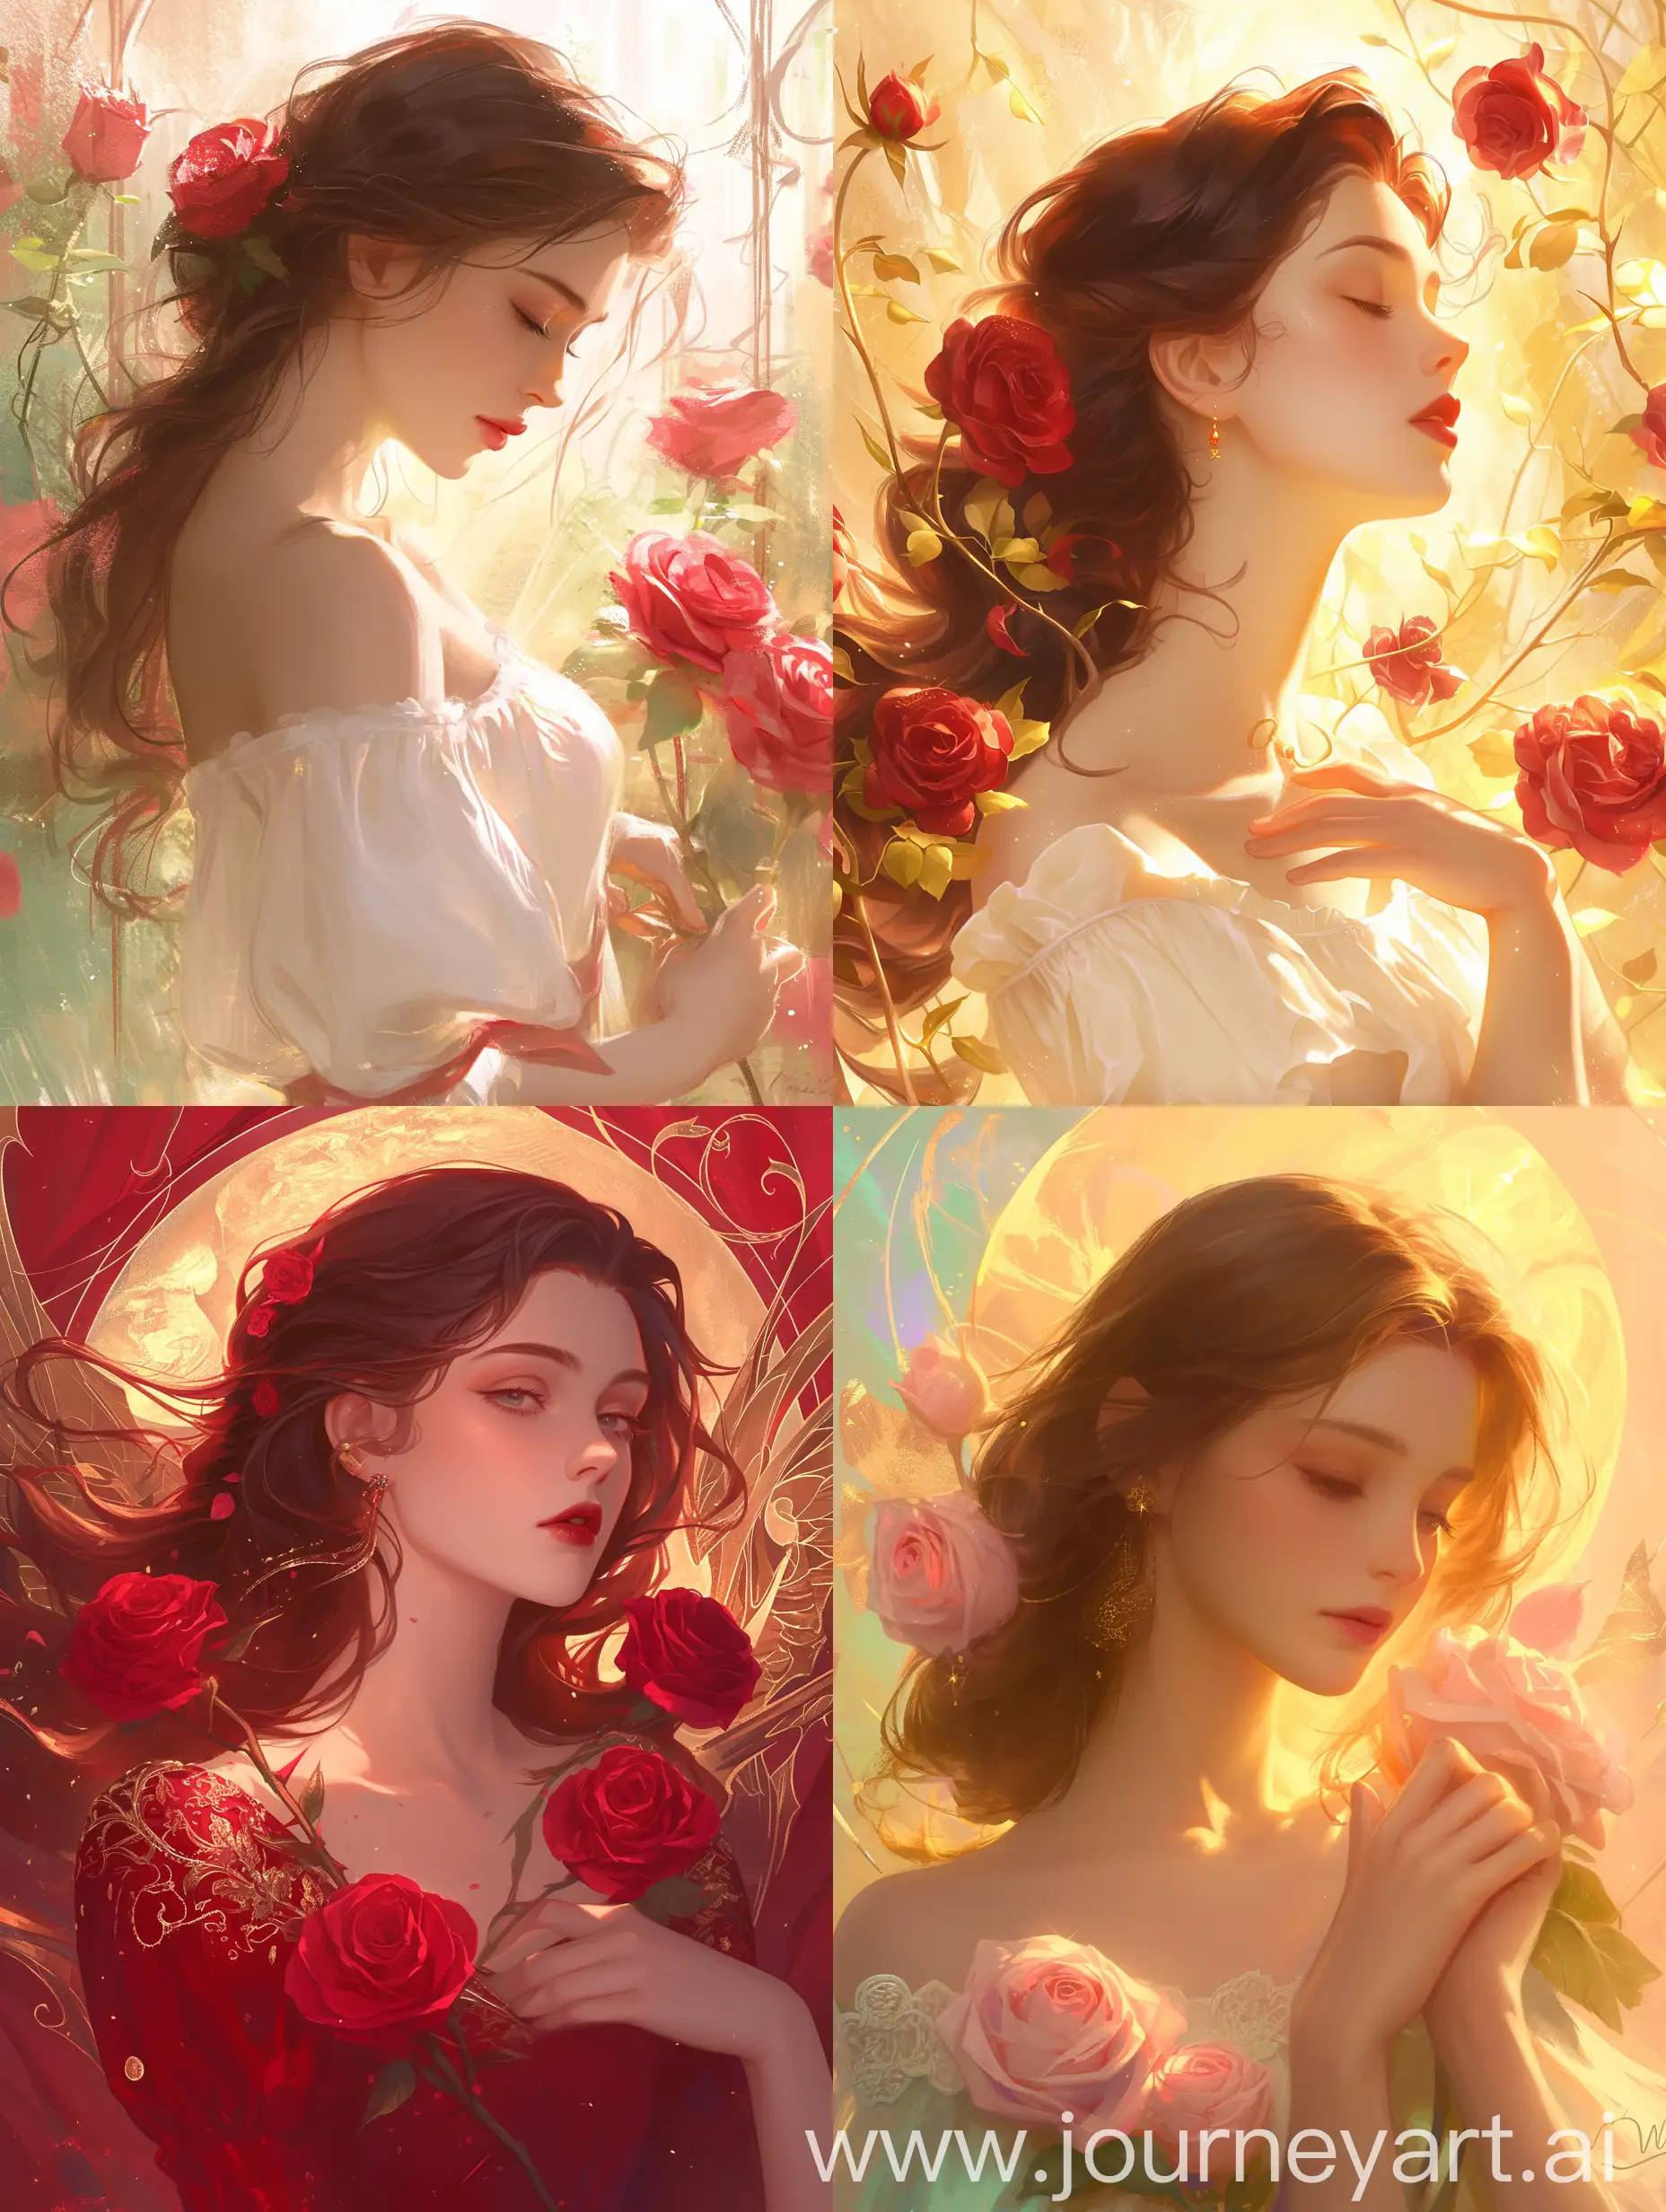 Dreamy, ethereal, enchanting, magical, romantic, art nouveau, digital art of woman with roses, beautiful, composition, wlop, ethereal --niji 6